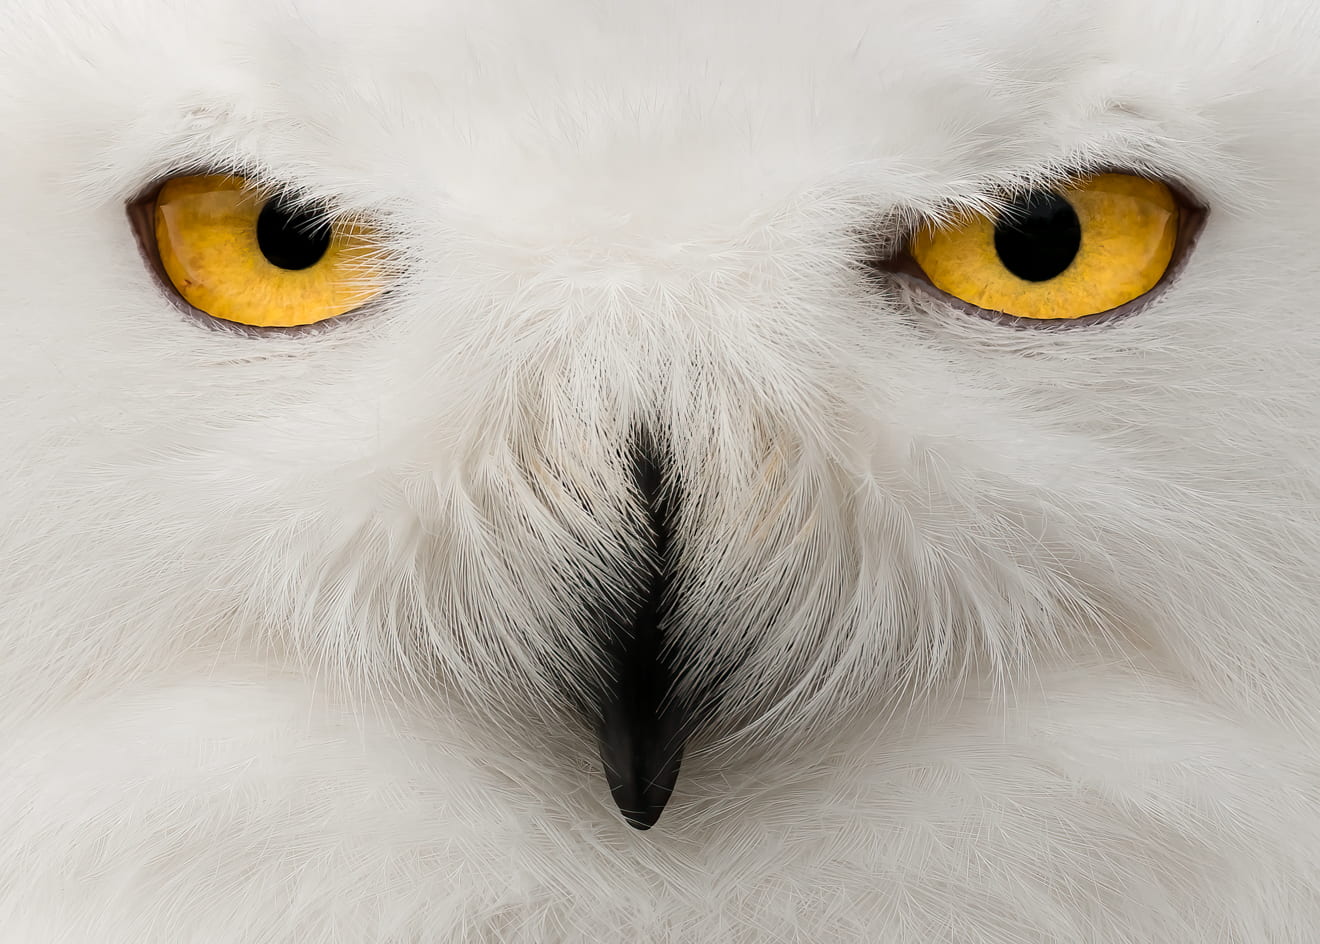 close-up photograph of a snowy owl's eyes and beak